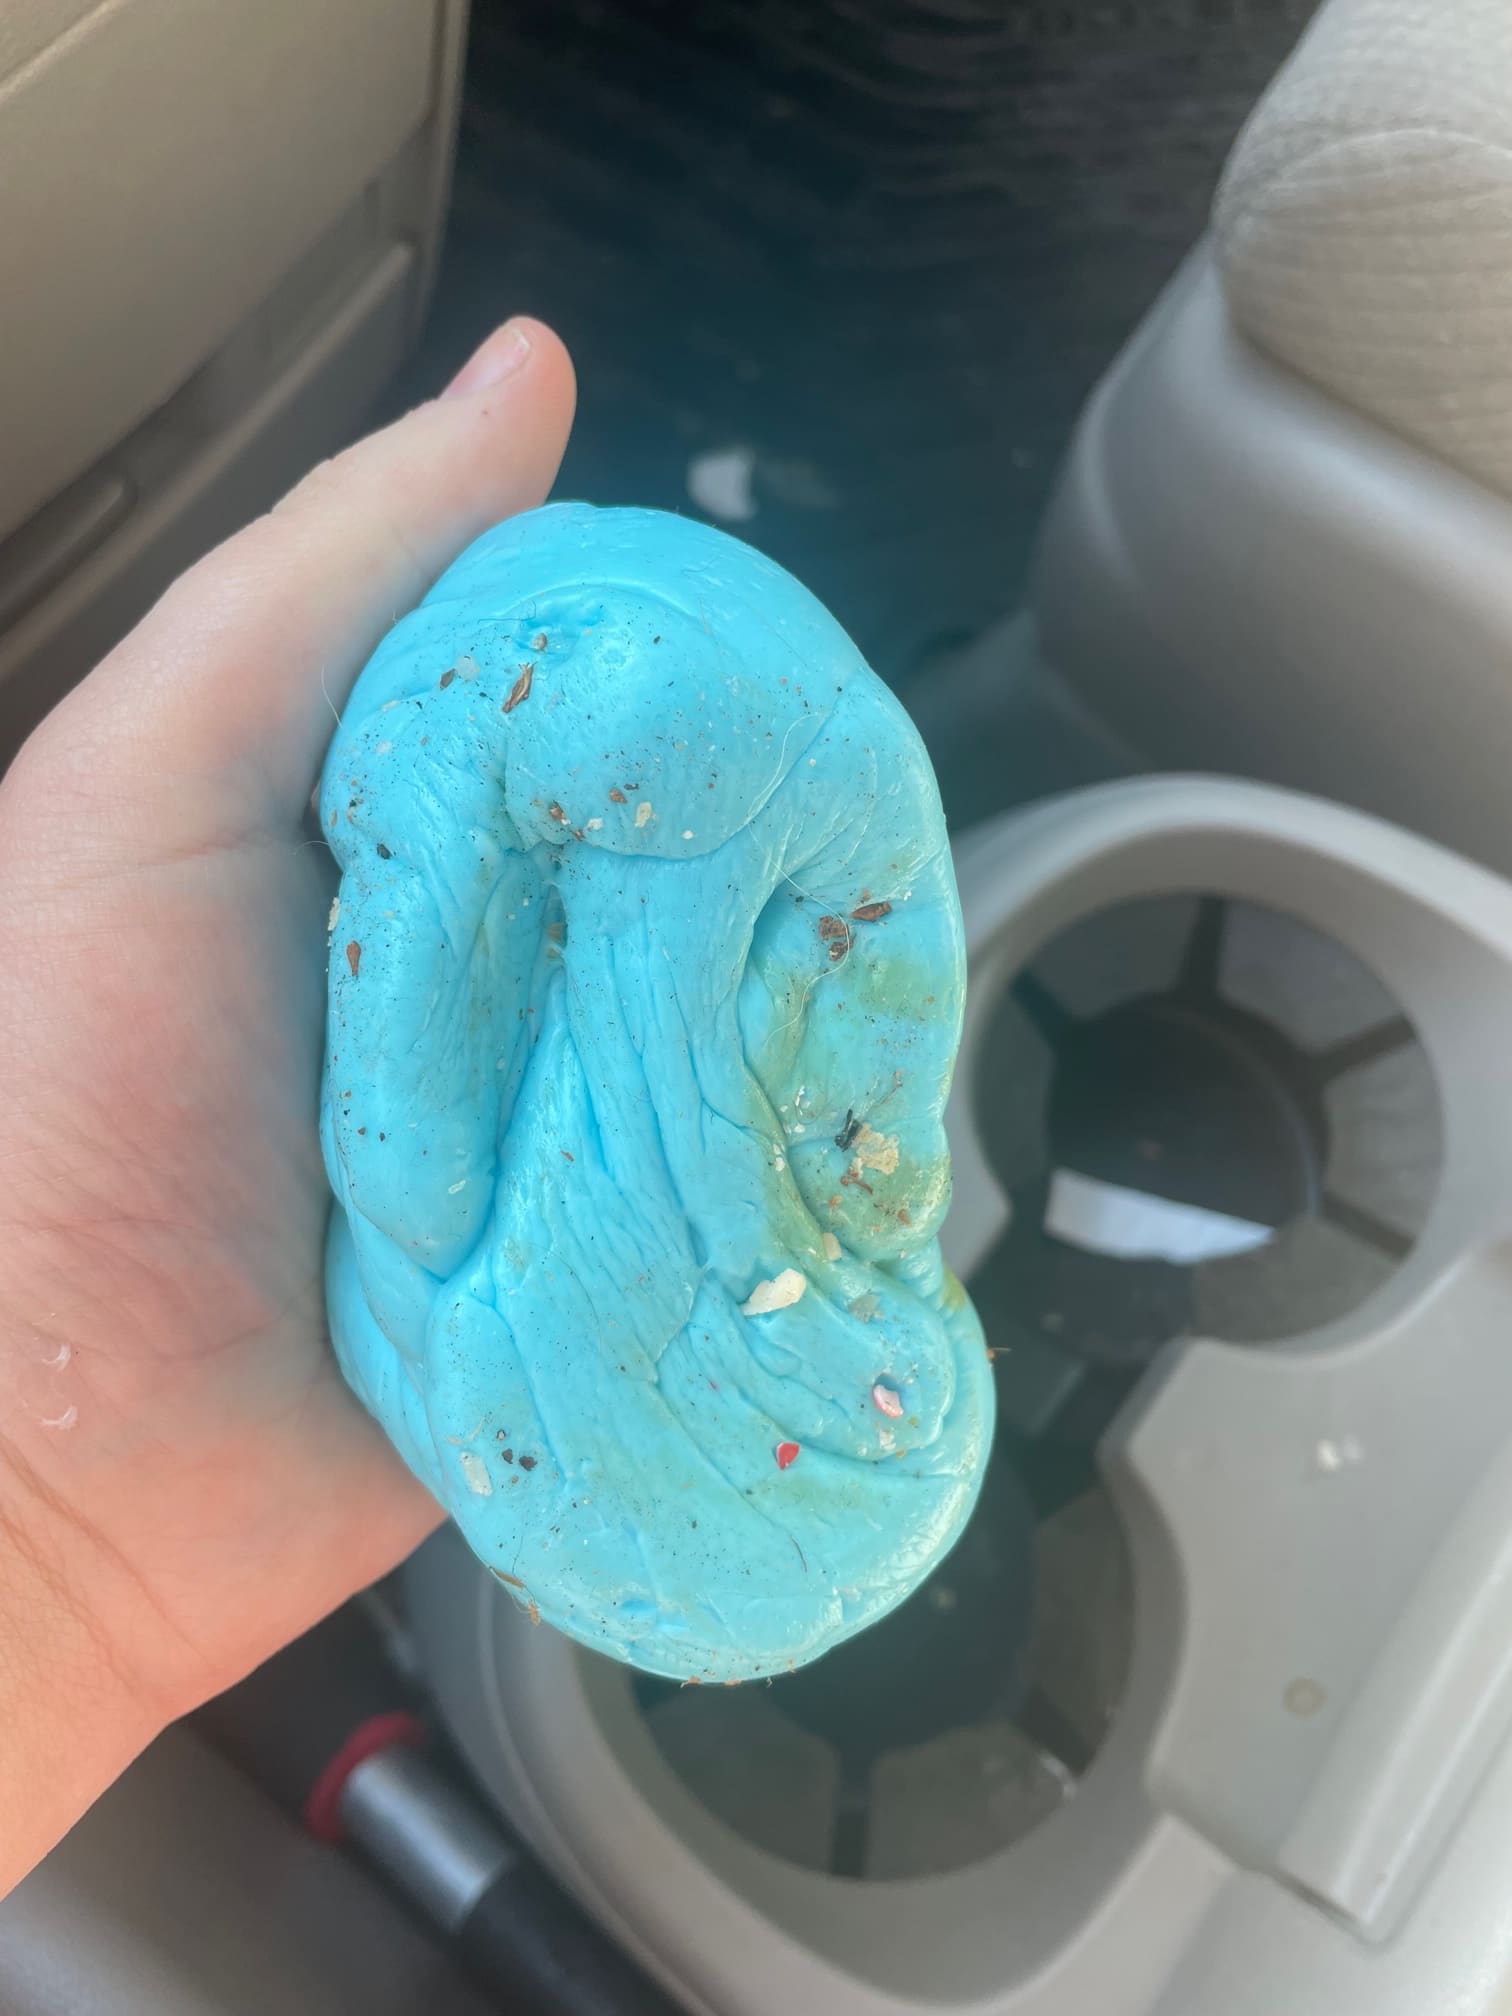 Dad Reviews ColorCoral Slime Dust Cleaner 